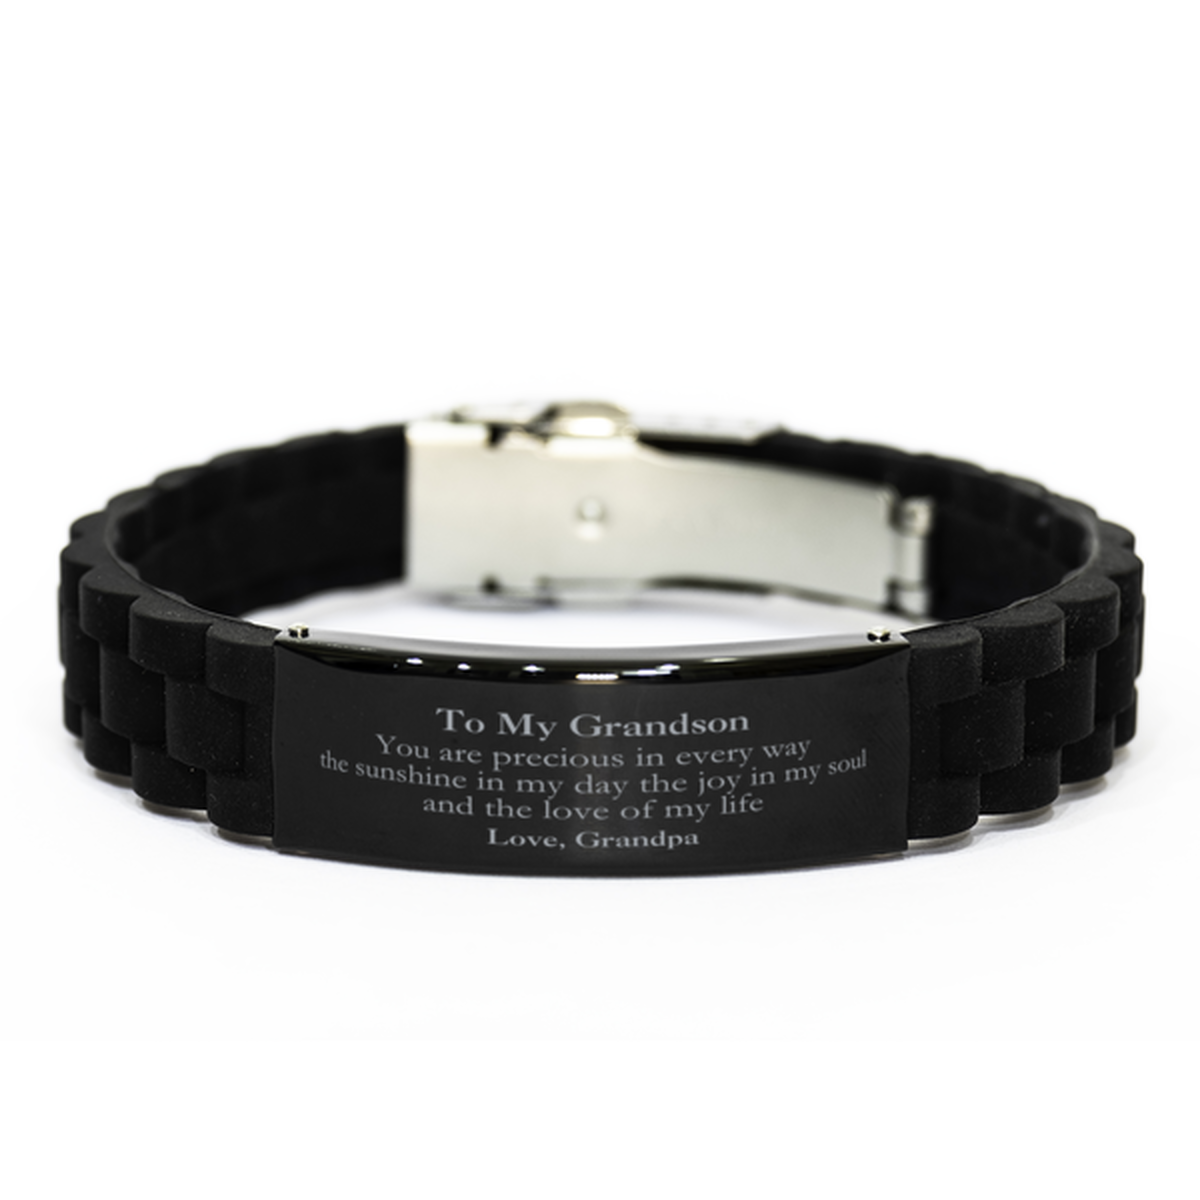 Graduation Gifts for Grandson Black Glidelock Clasp Bracelet Present from Grandpa, Christmas Grandson Birthday Gifts Grandson You are precious in every way the sunshine in my day. Love, Grandpa